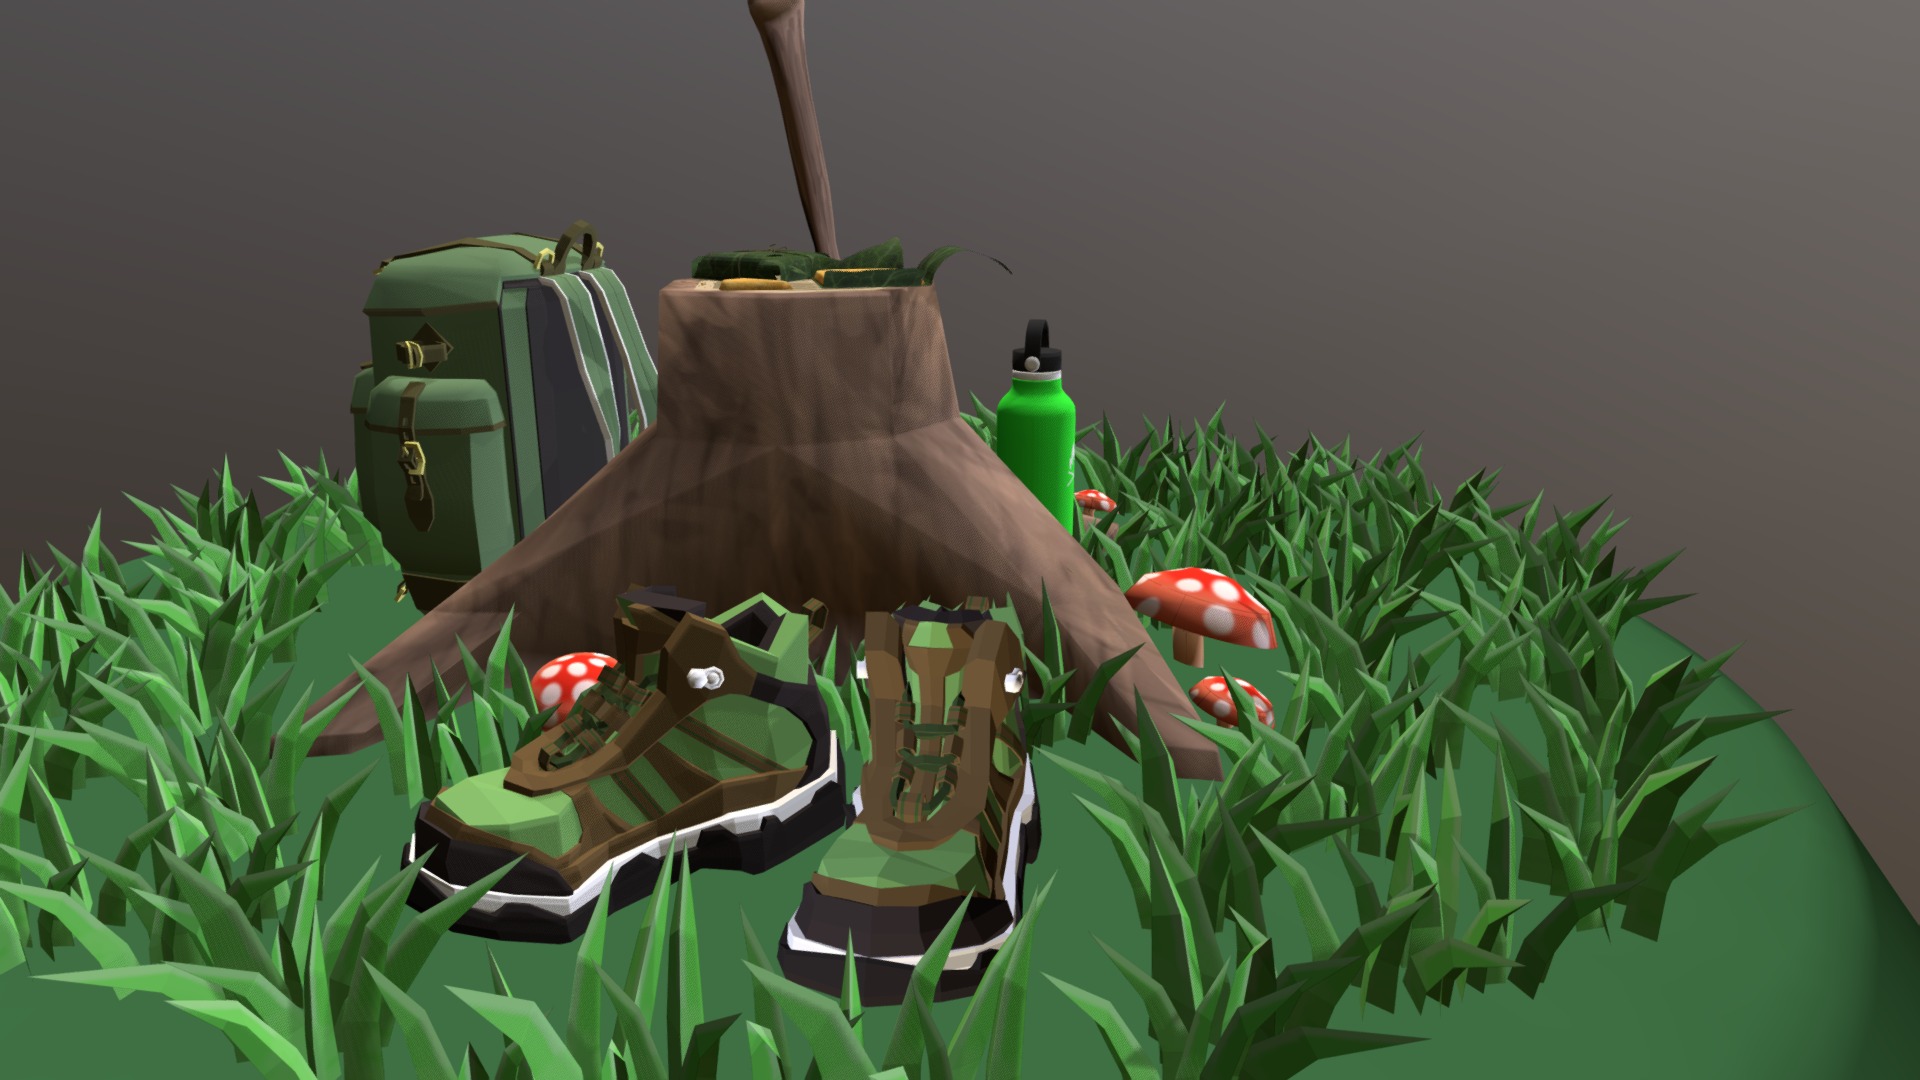 3D model Low Poly Adventure Compilation - This is a 3D model of the Low Poly Adventure Compilation. The 3D model is about a toy figurine in a grass field.